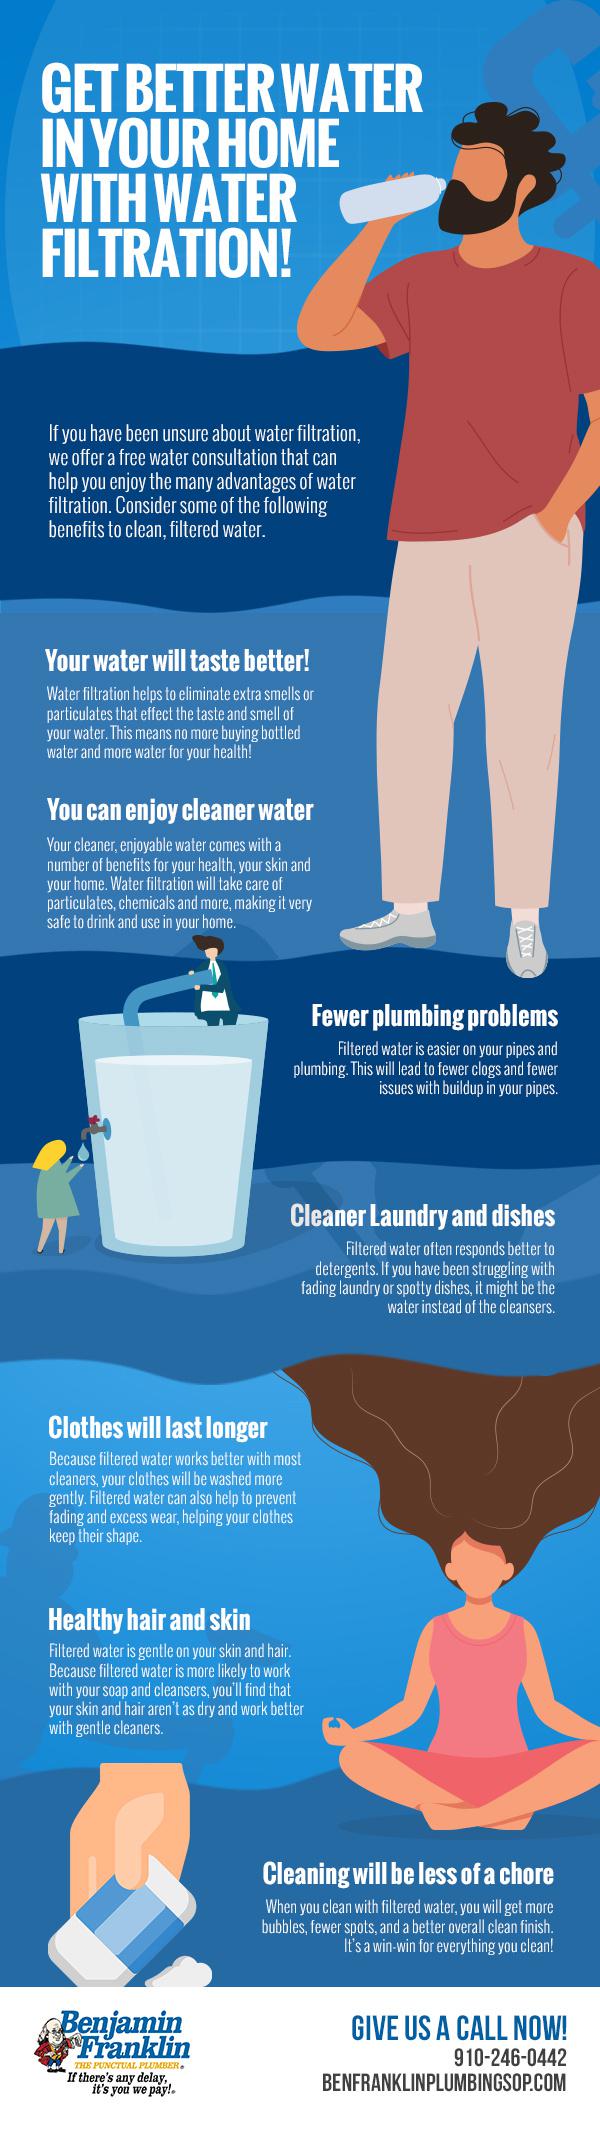 Get Better Water in Your Home with Water Filtration Infographic